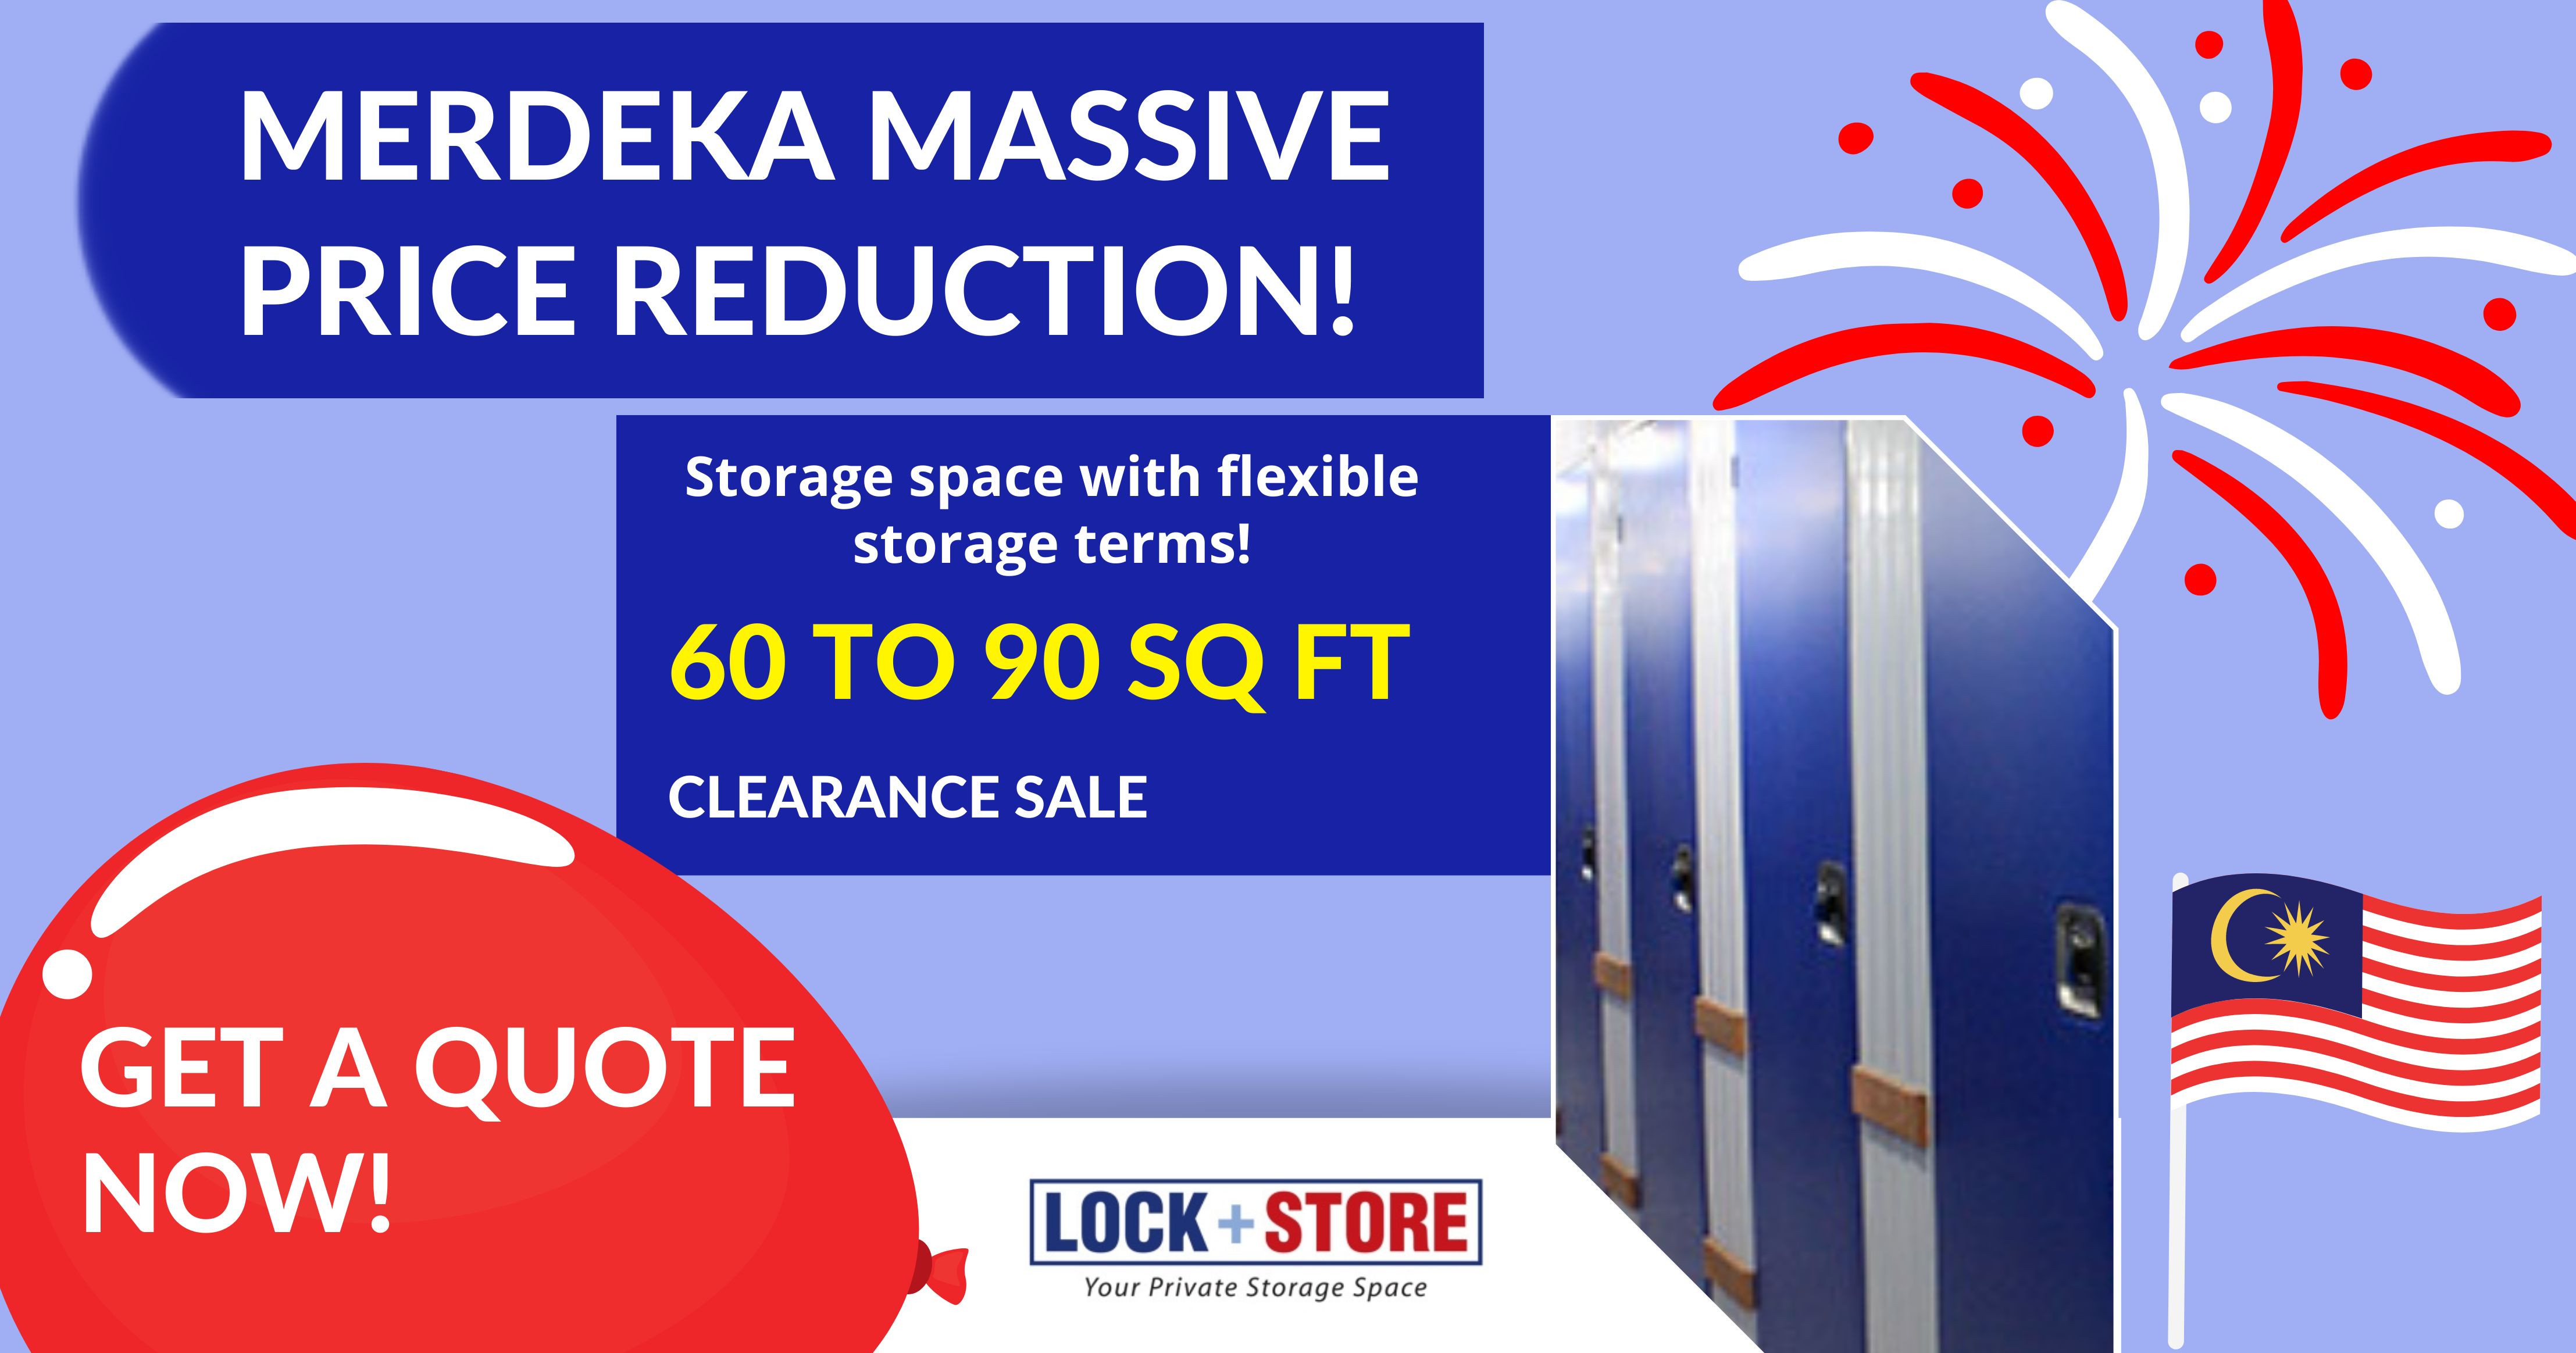 Massive reductions on 60 to 90 sq ft unit at Lock+Store Malaysia in conjunction with Merdeka Day 2022.